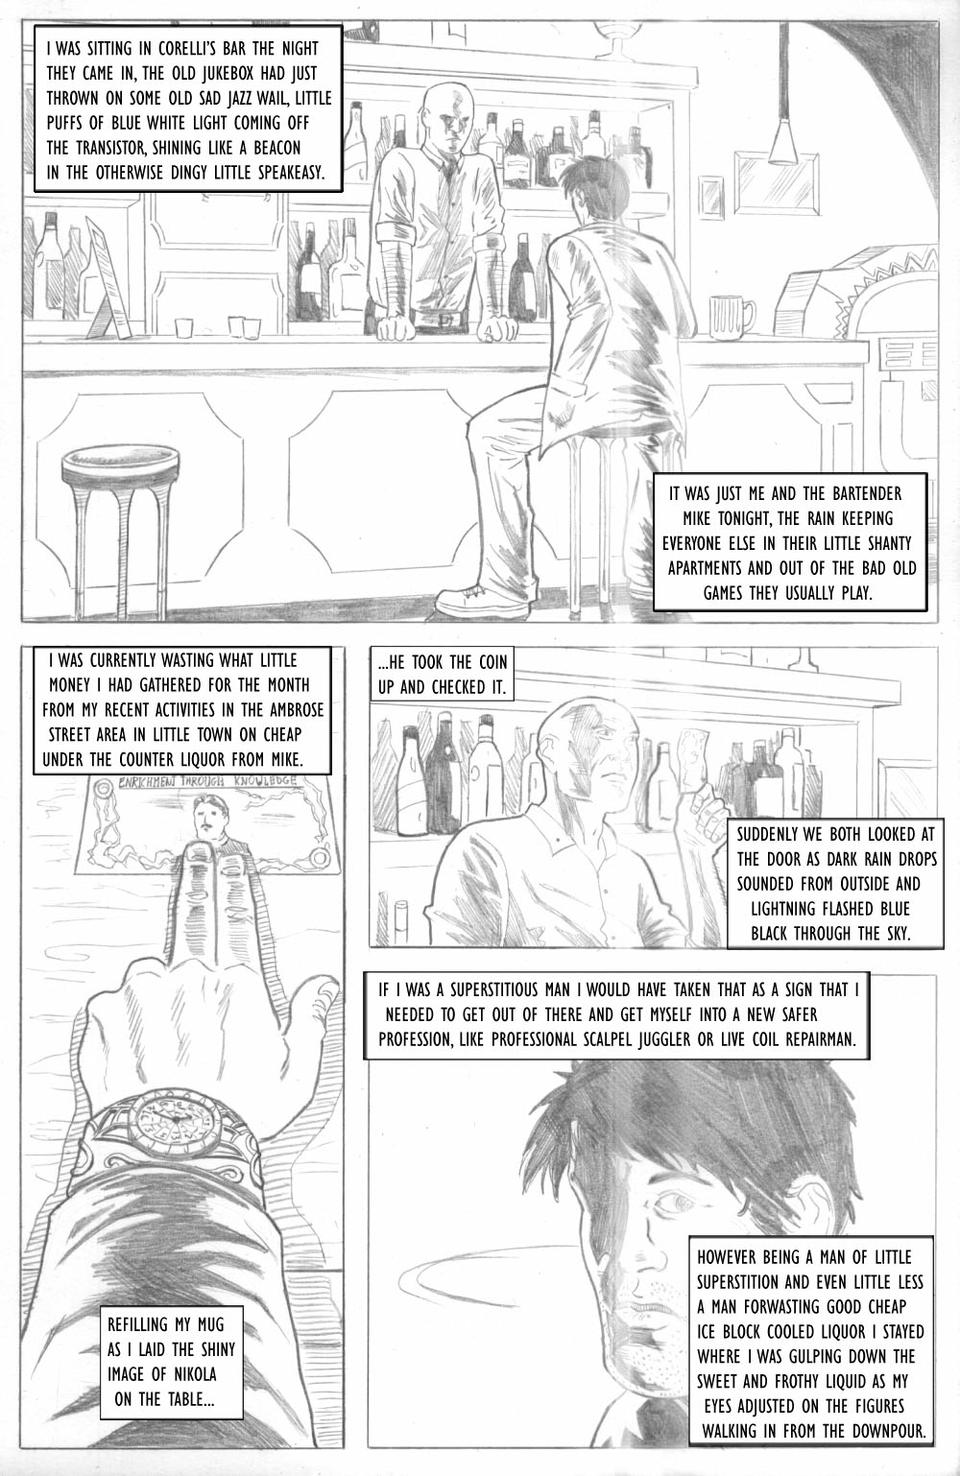 Aleister miles: The october wolves page 1